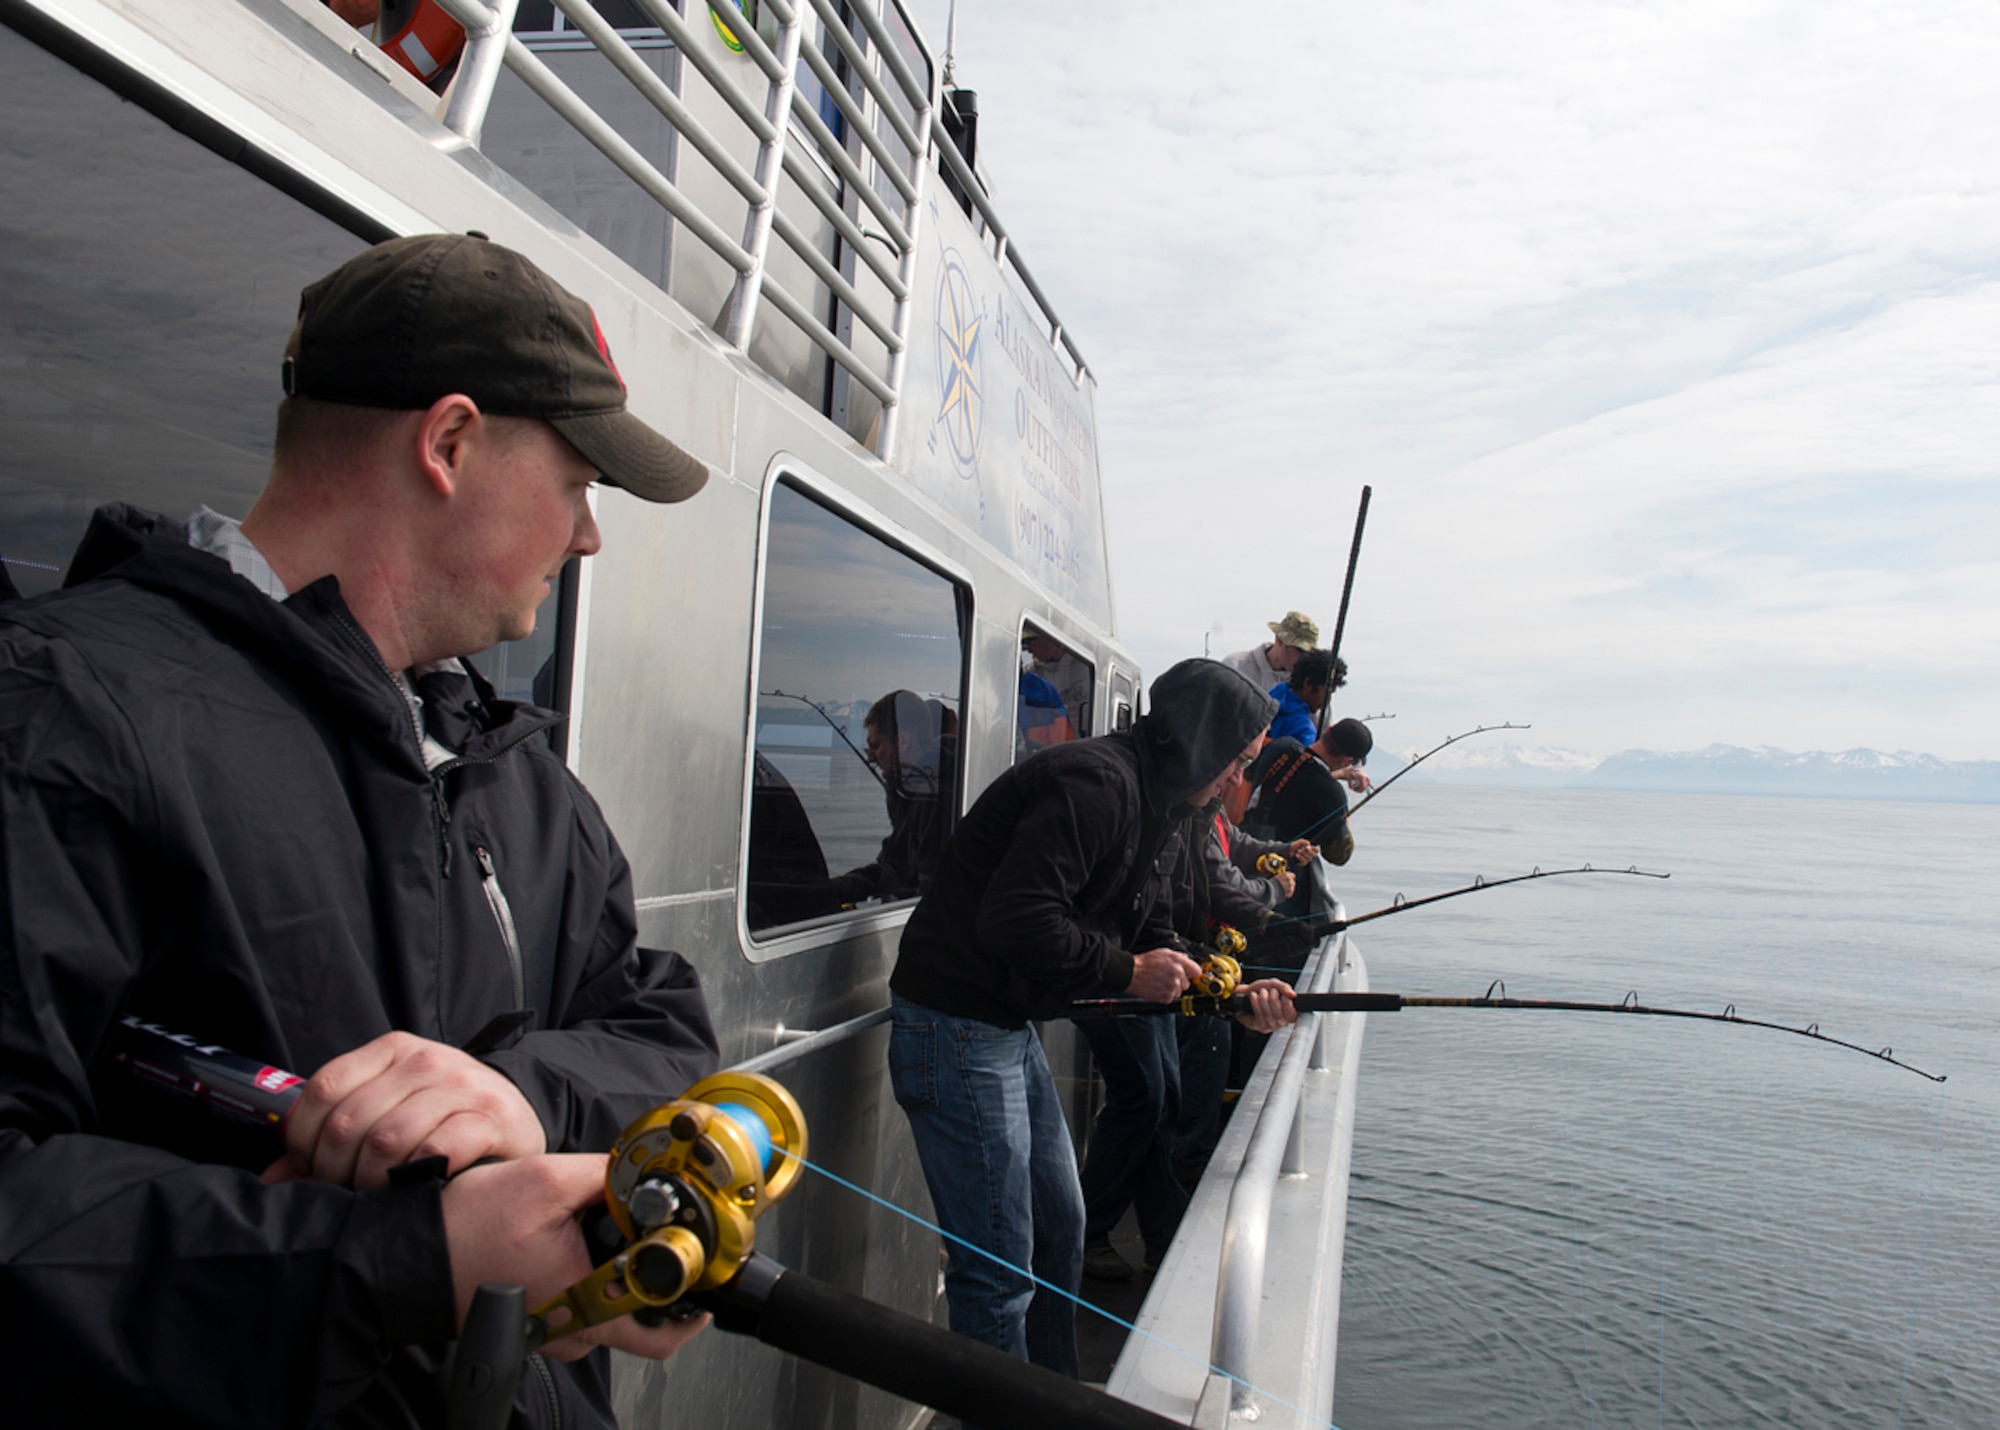 Service members from Joint Base Elmendorf-Richardson fish aboard Sea Quest during the Annual Armed Services Combat Fishing Tournament in Seward, Alaska, May 22, 2014. The tournament saw approximately 200 active-duty military members participate and the fish caught ranged from halibut to rockfish. (U.S. Air Force photo/Staff Sgt. Zachary Wolf)